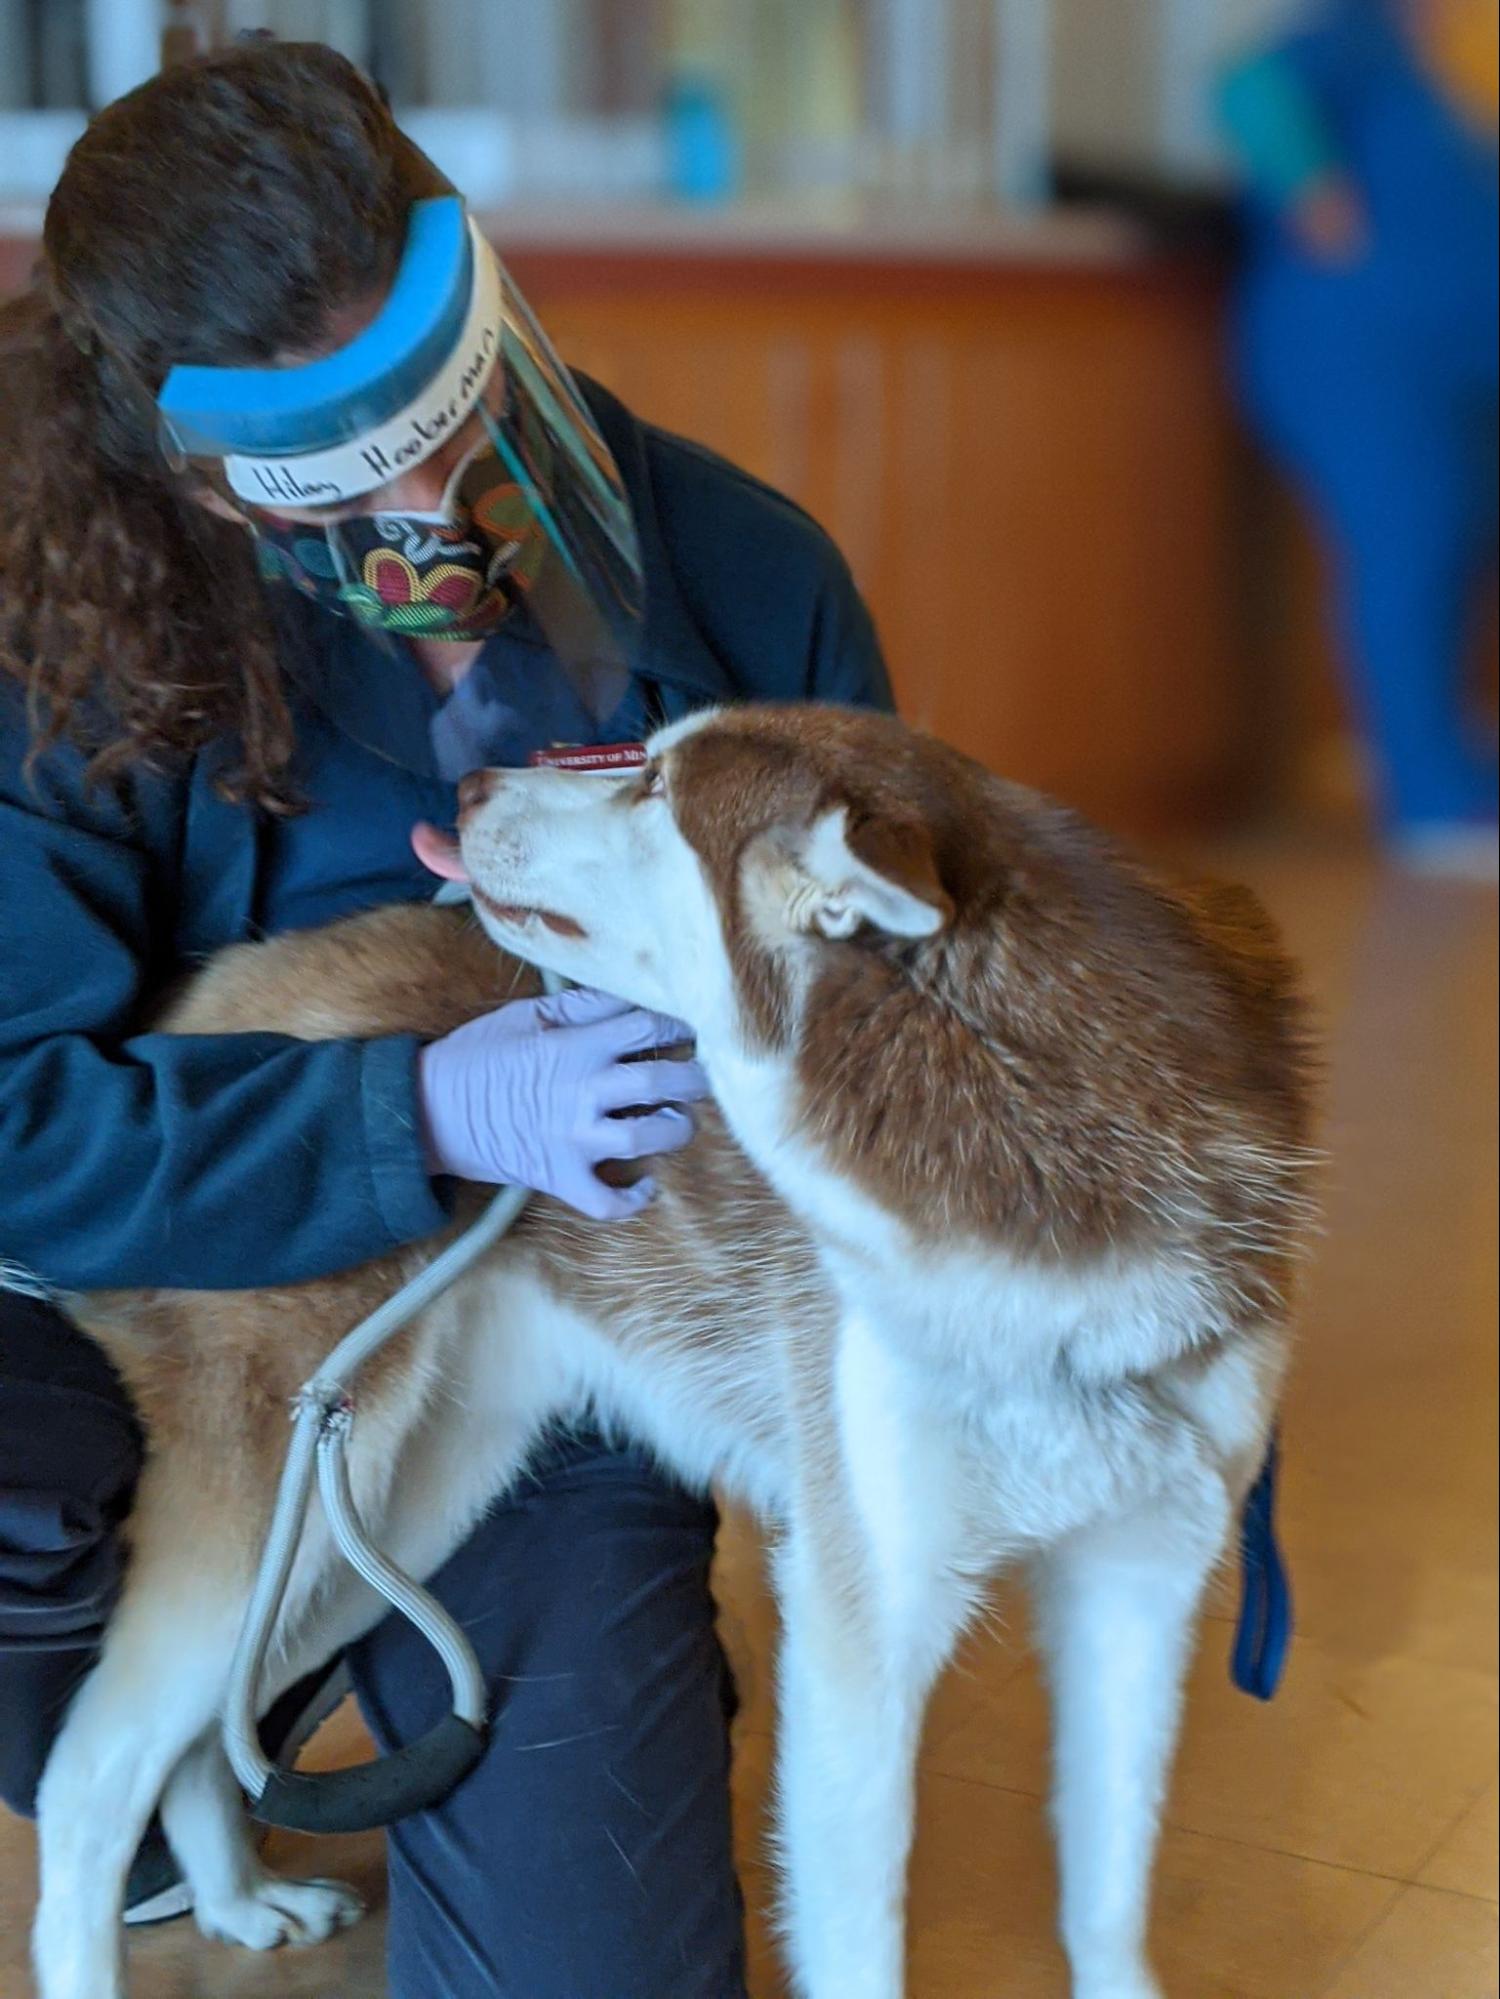 A dog presents to the University of Minnesota College of Veterinary Medicine for treatment